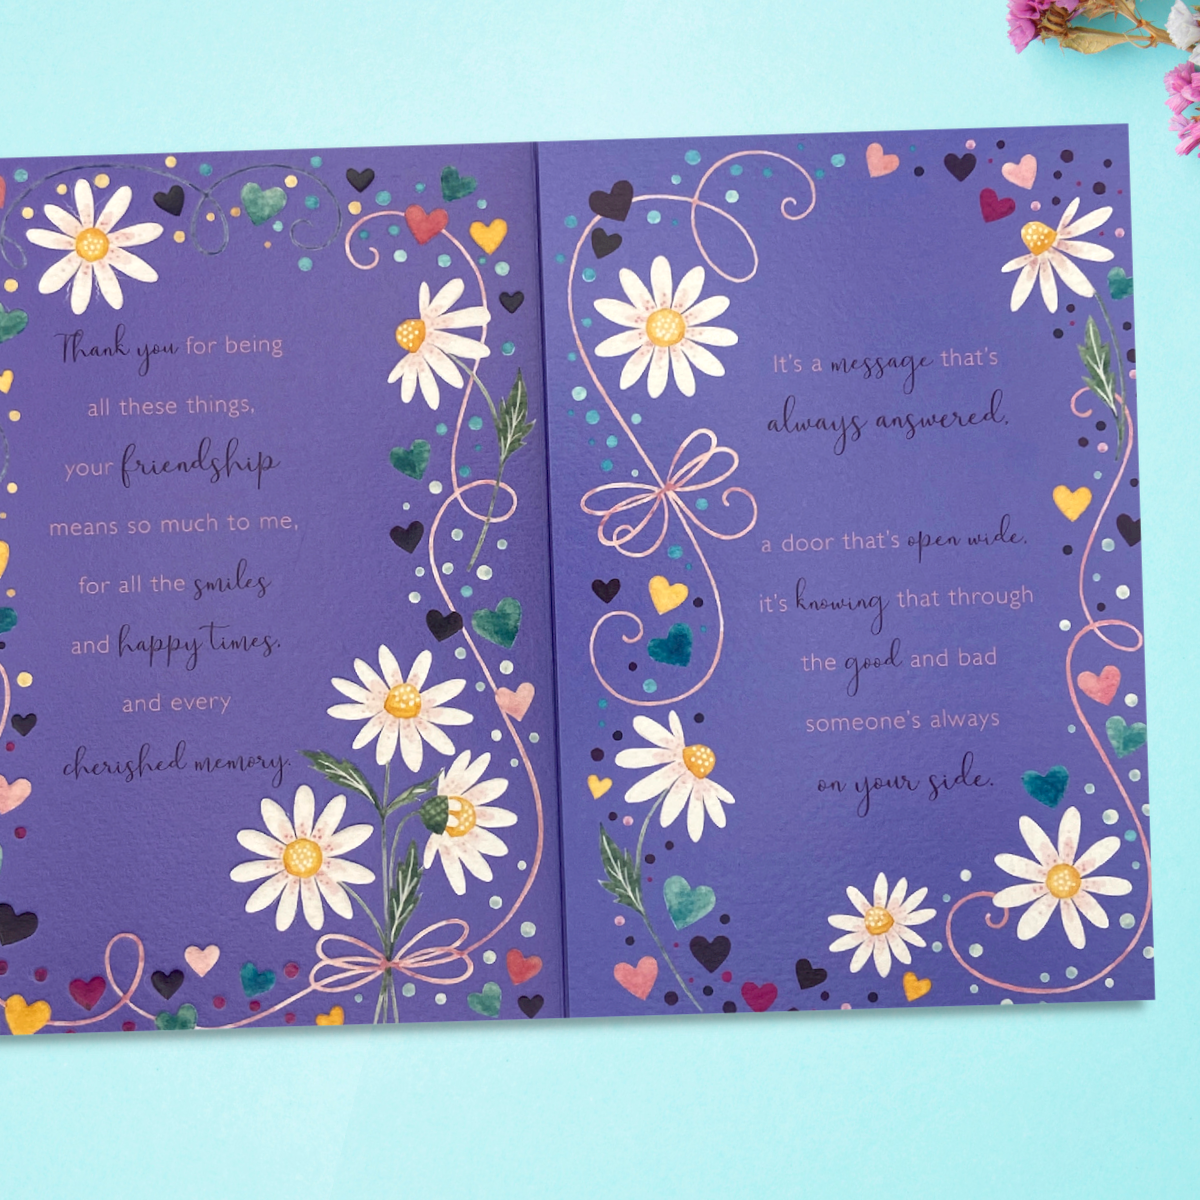 Inside image showing two pages on purple card with flowers and verse